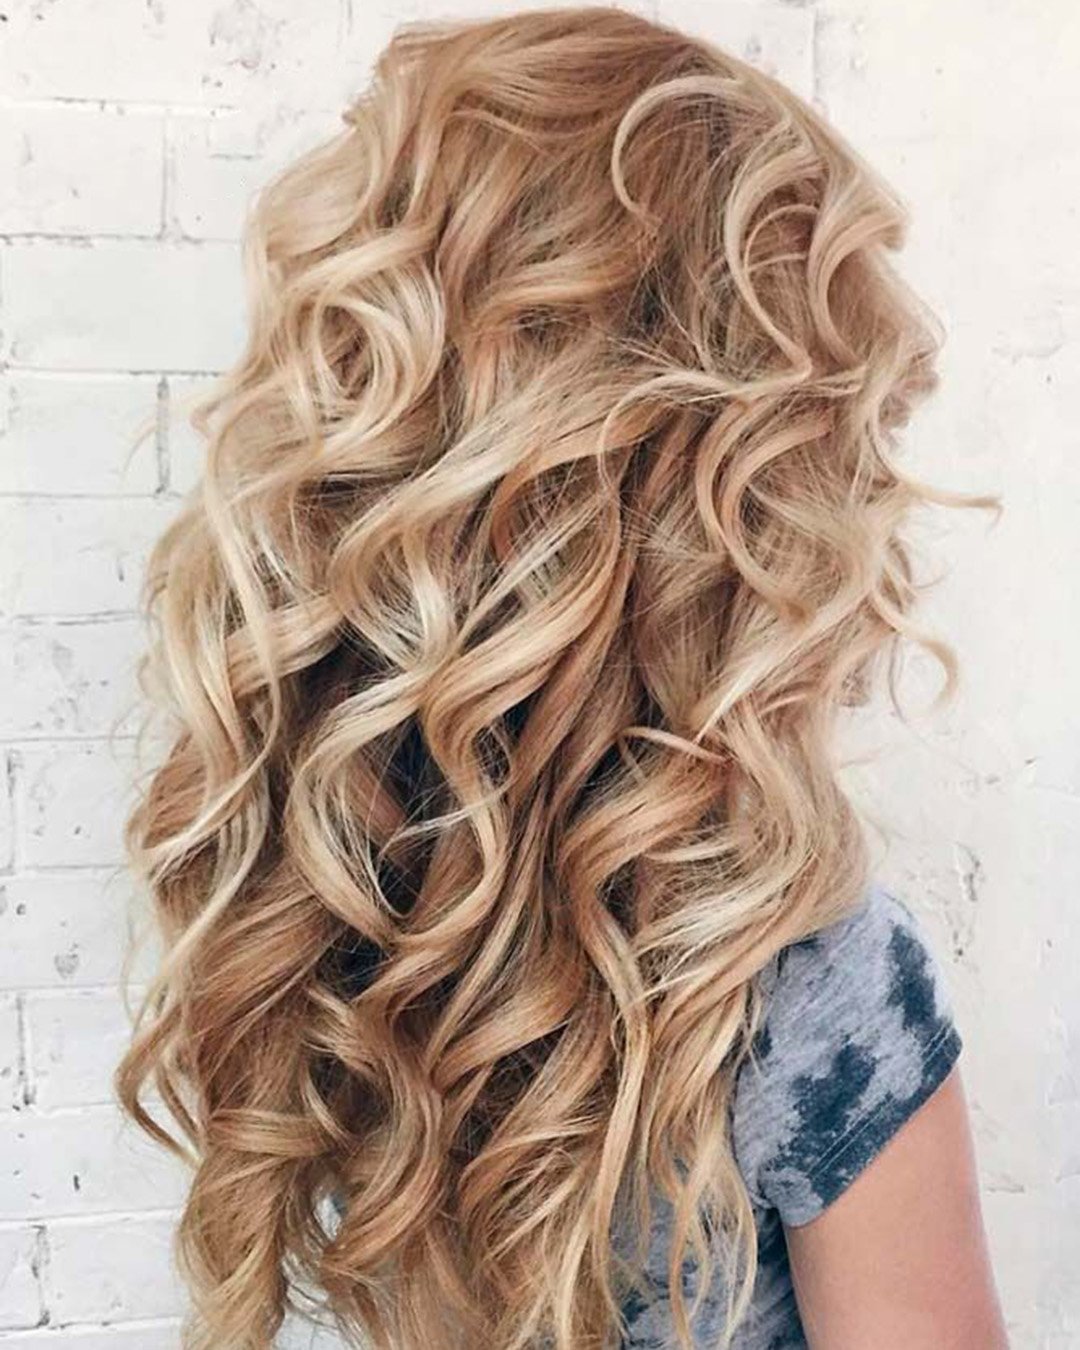 wedding hairstyles down curly volume long lee4you